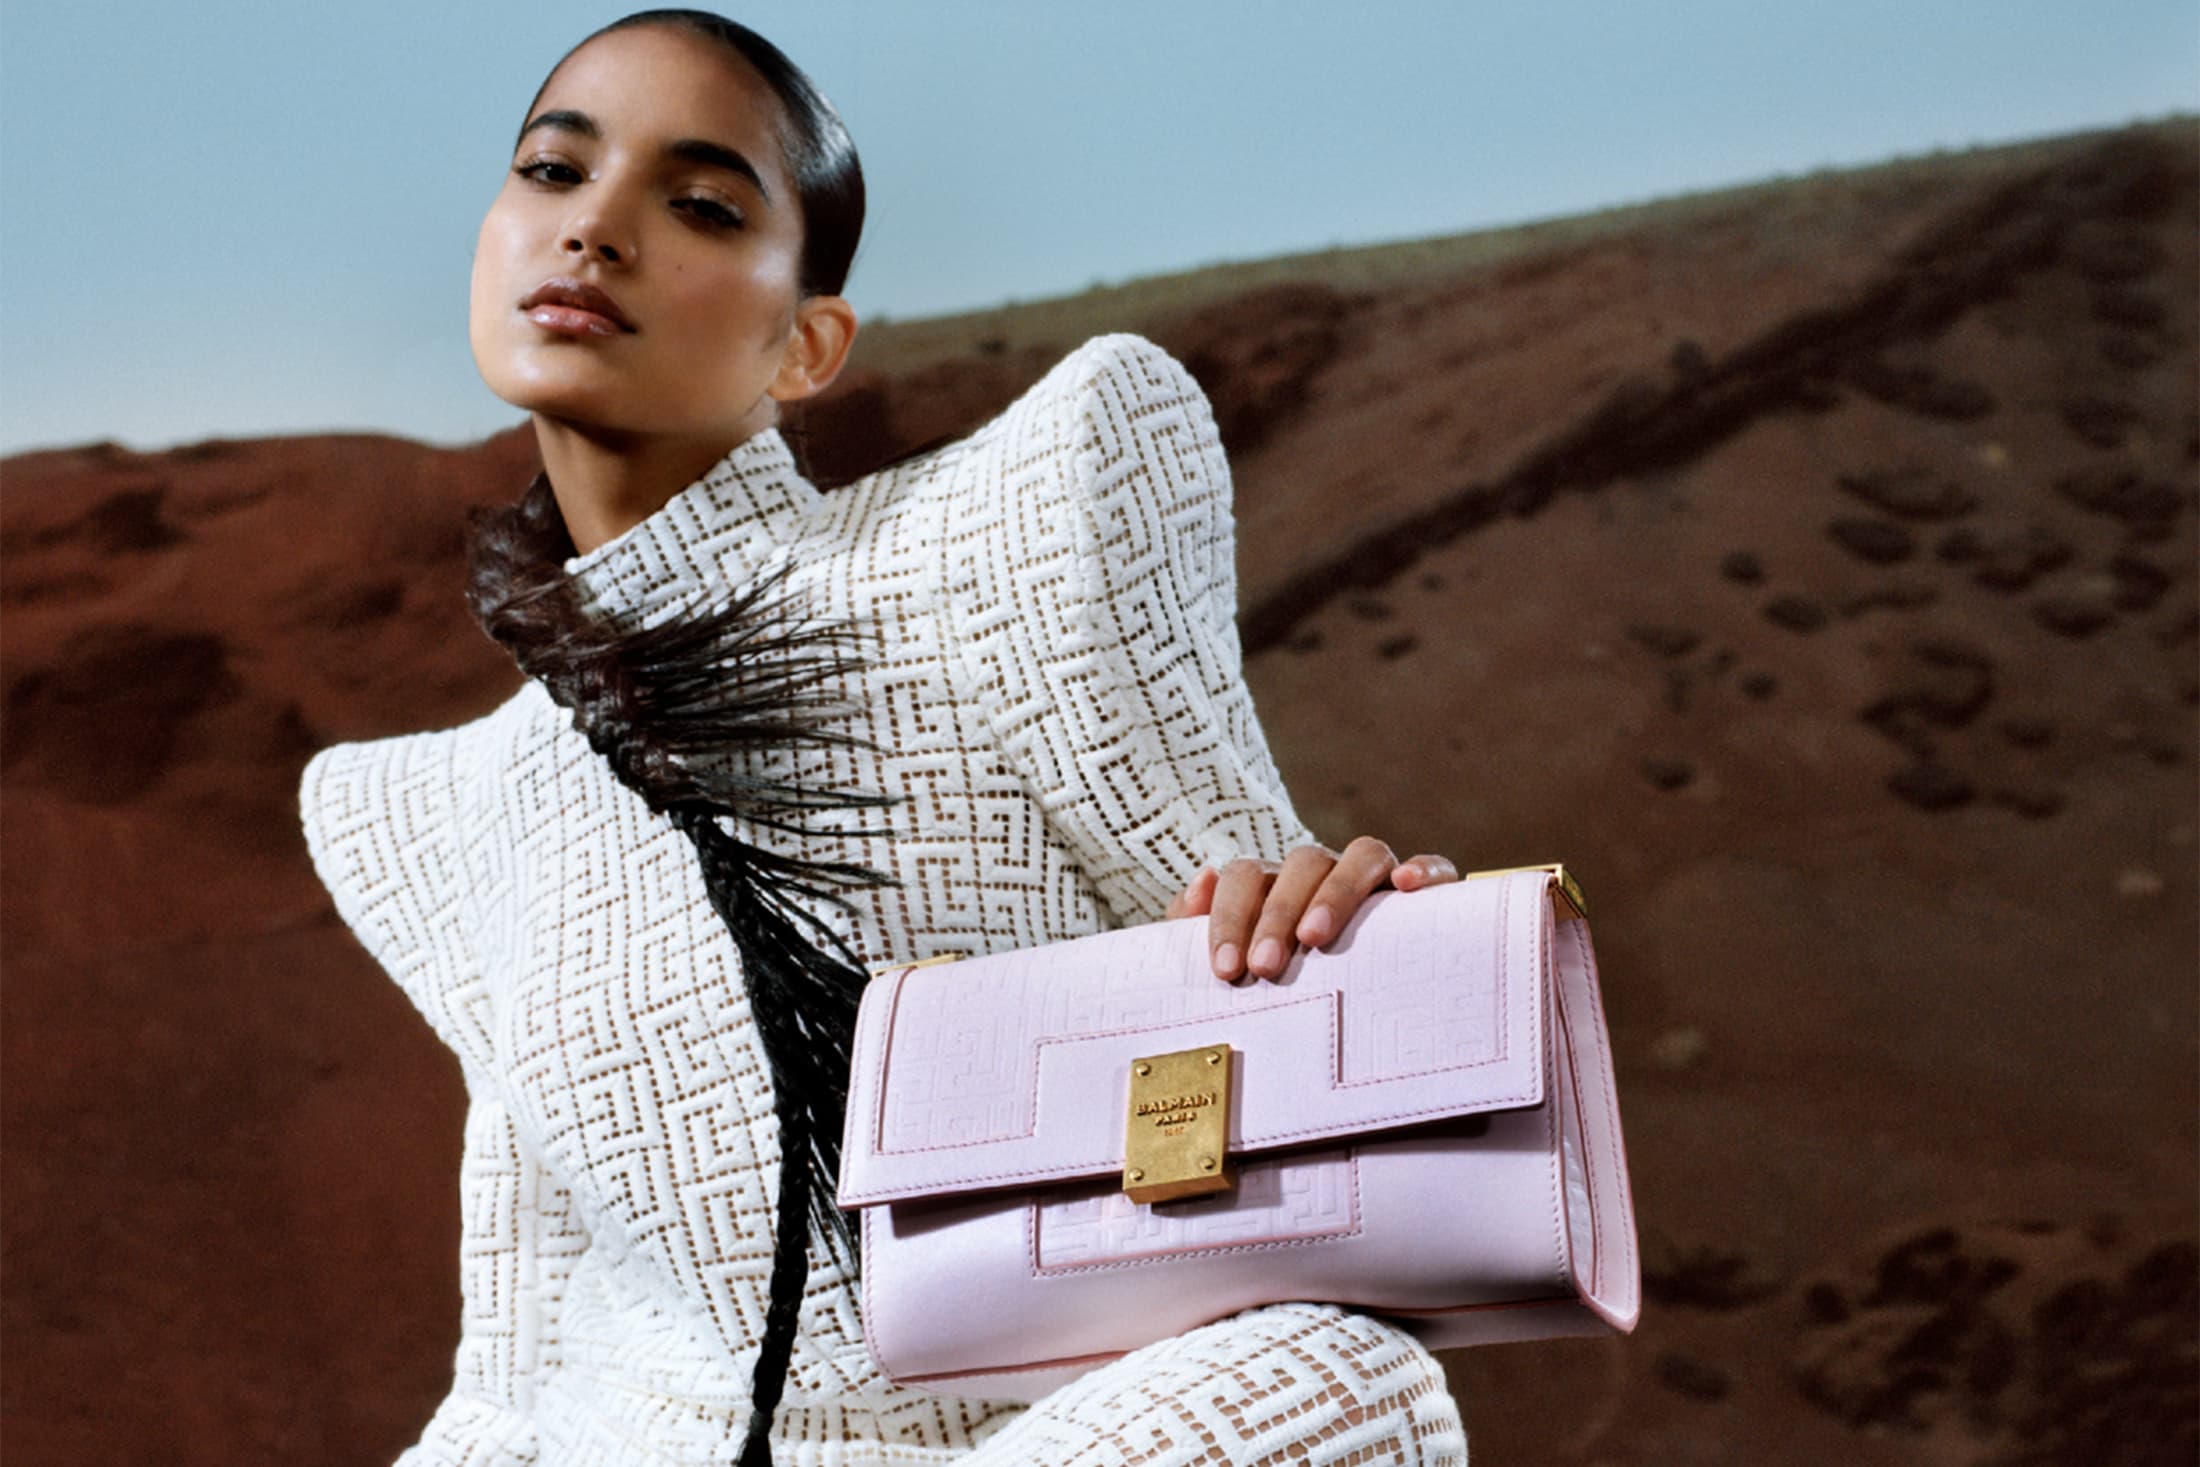 Balmain 1945 Bags Collection Spring 2021 Ad Campaign | The Impression